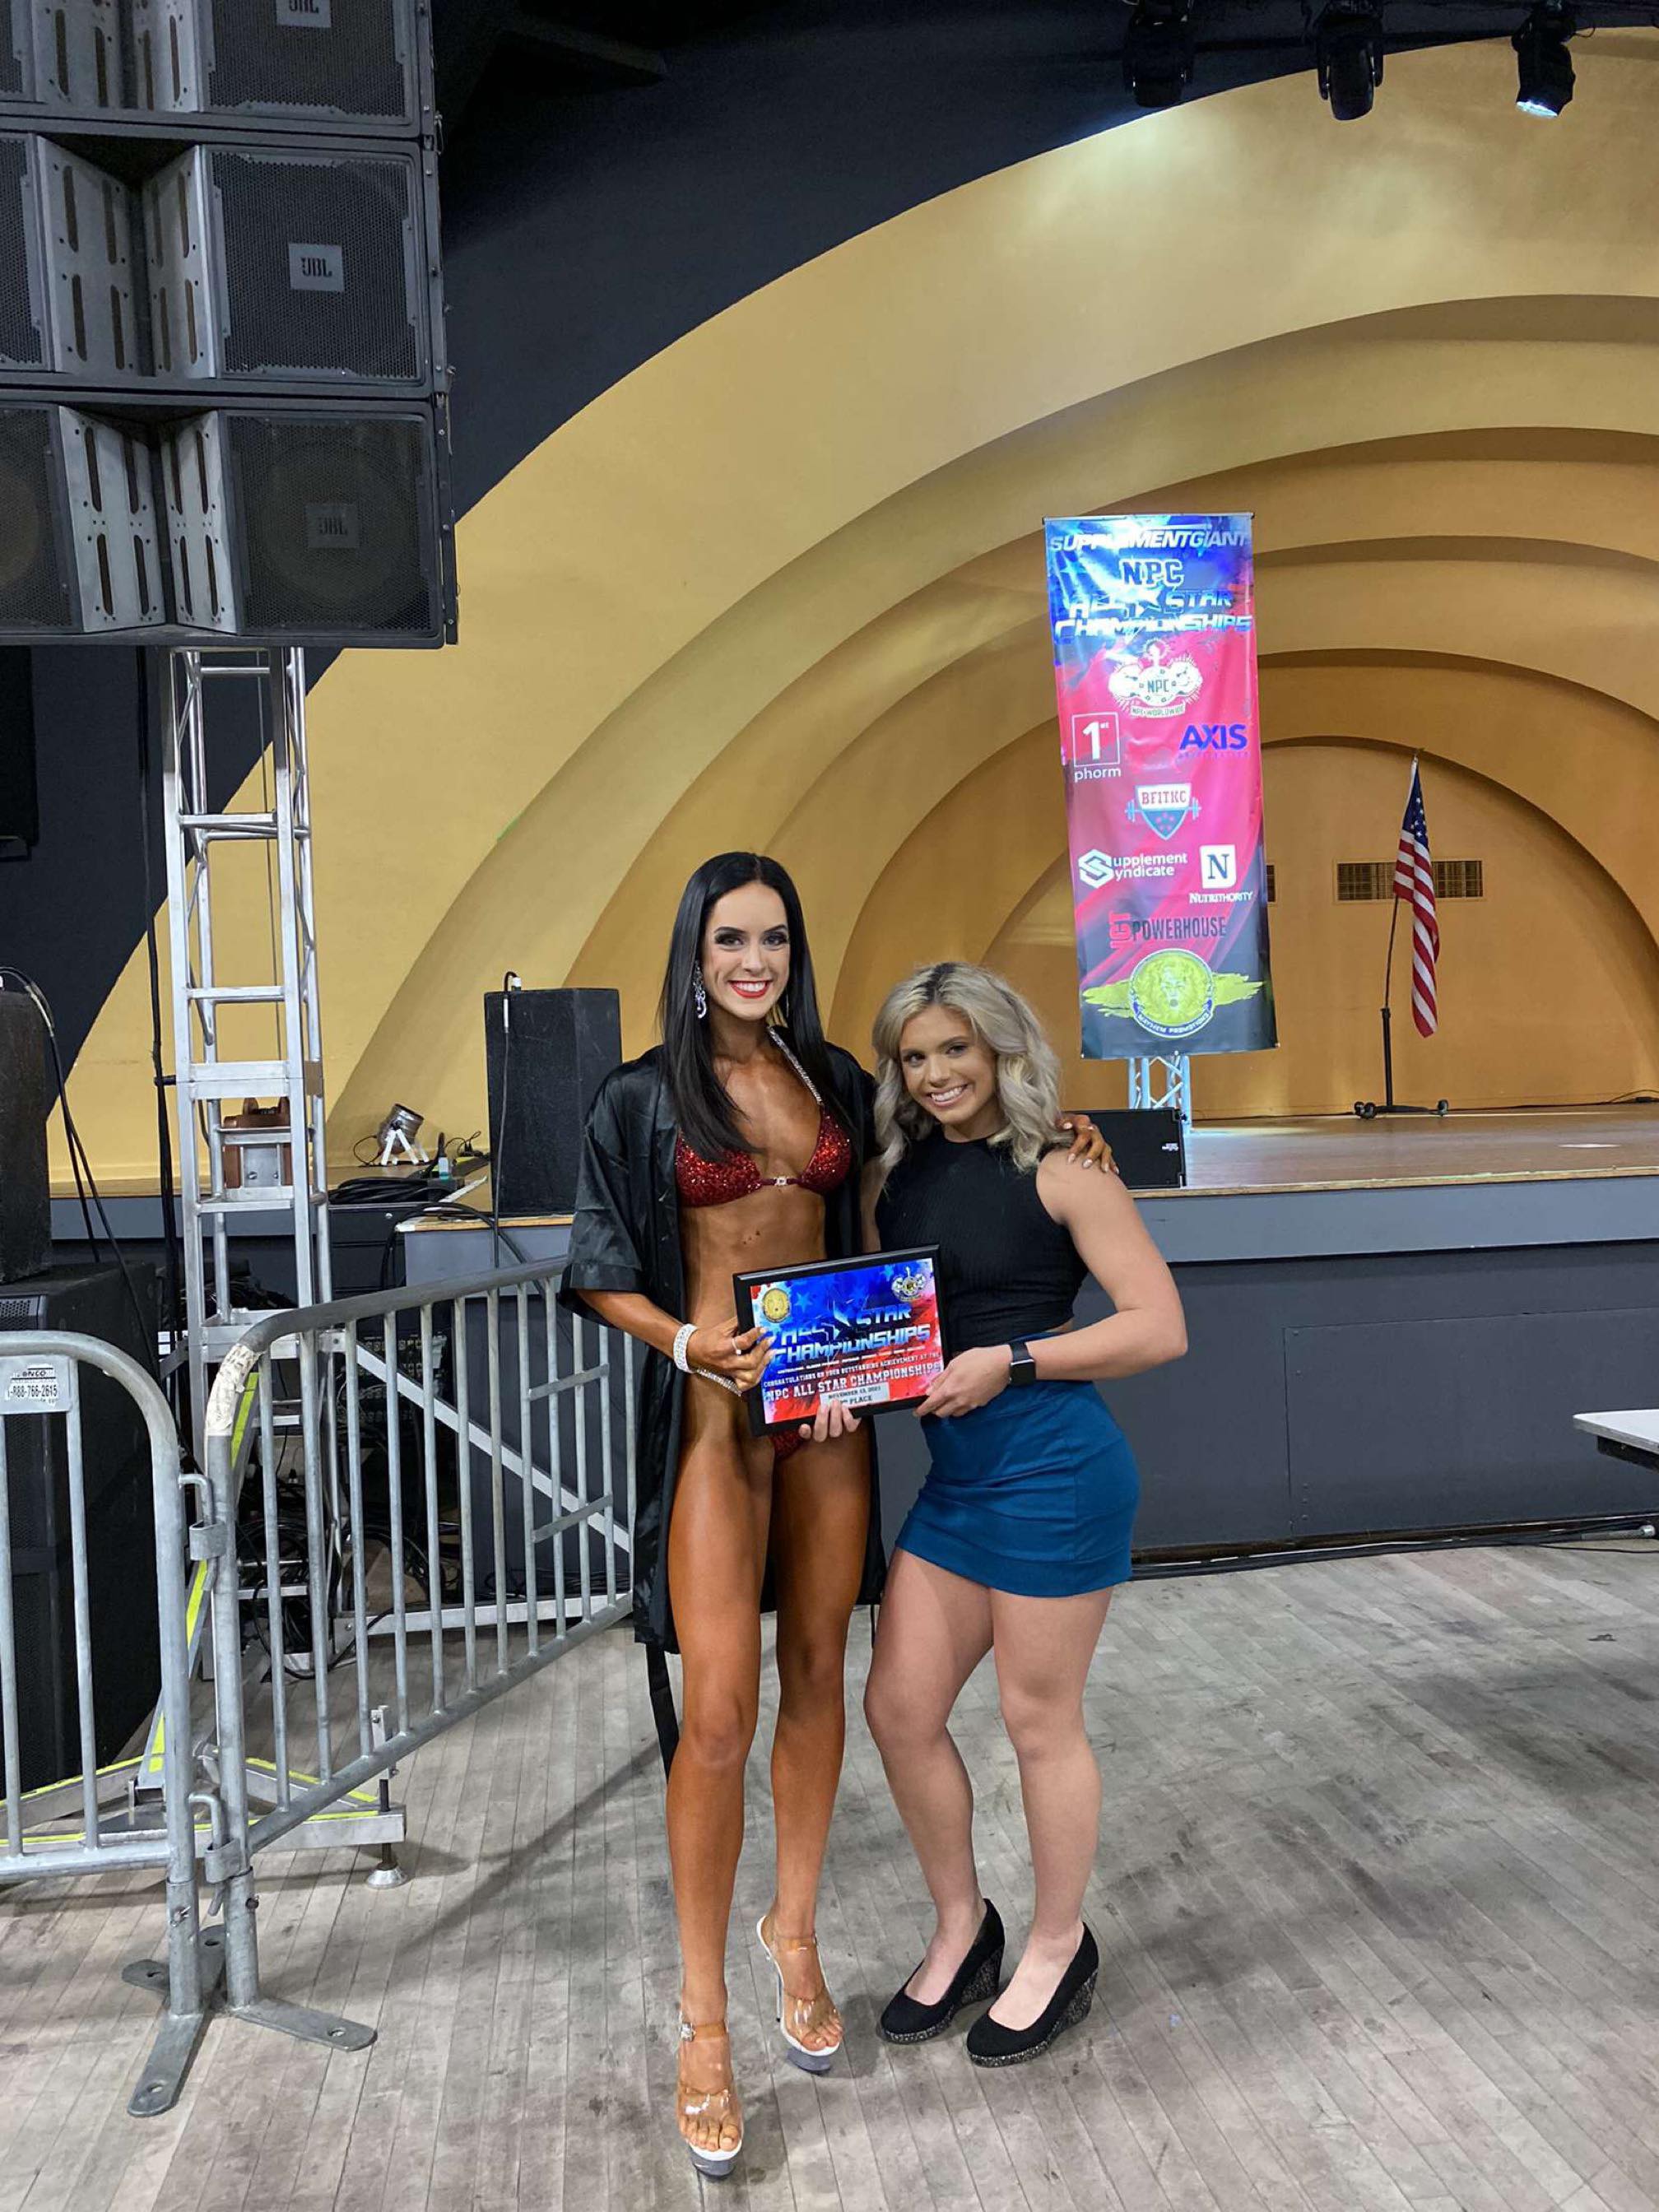 NU alumna wins second place at NPC All Star Championships